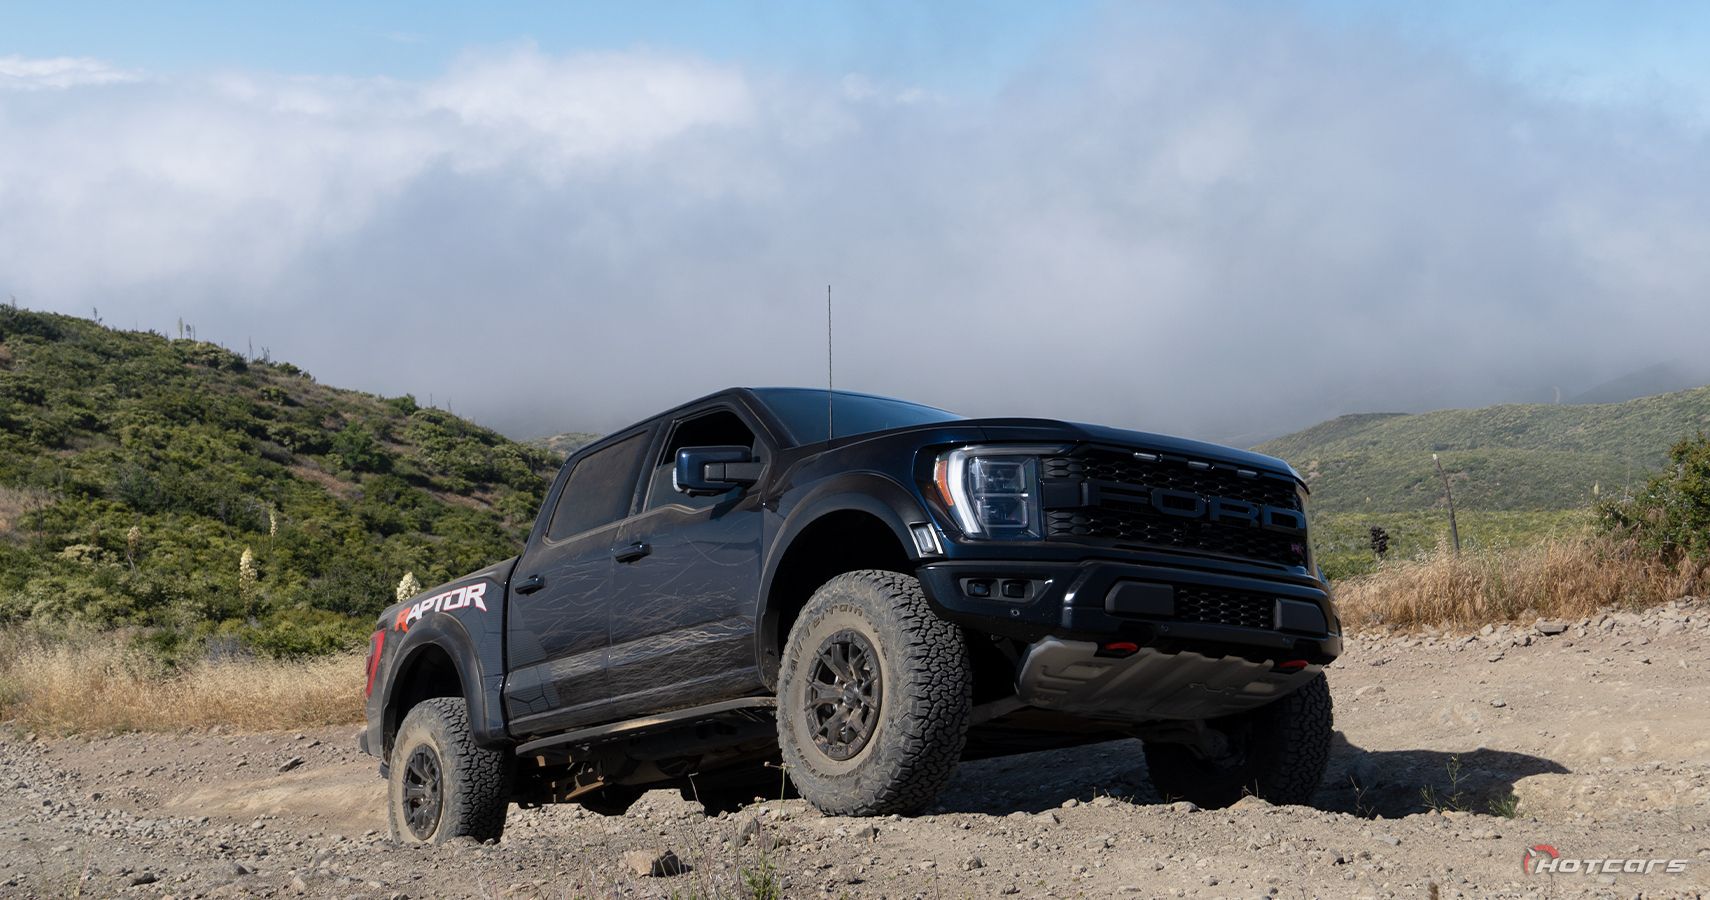 Ford F-150 Raptor R Front Three Quarters Off-Roading at Rowher Flats in Southern California